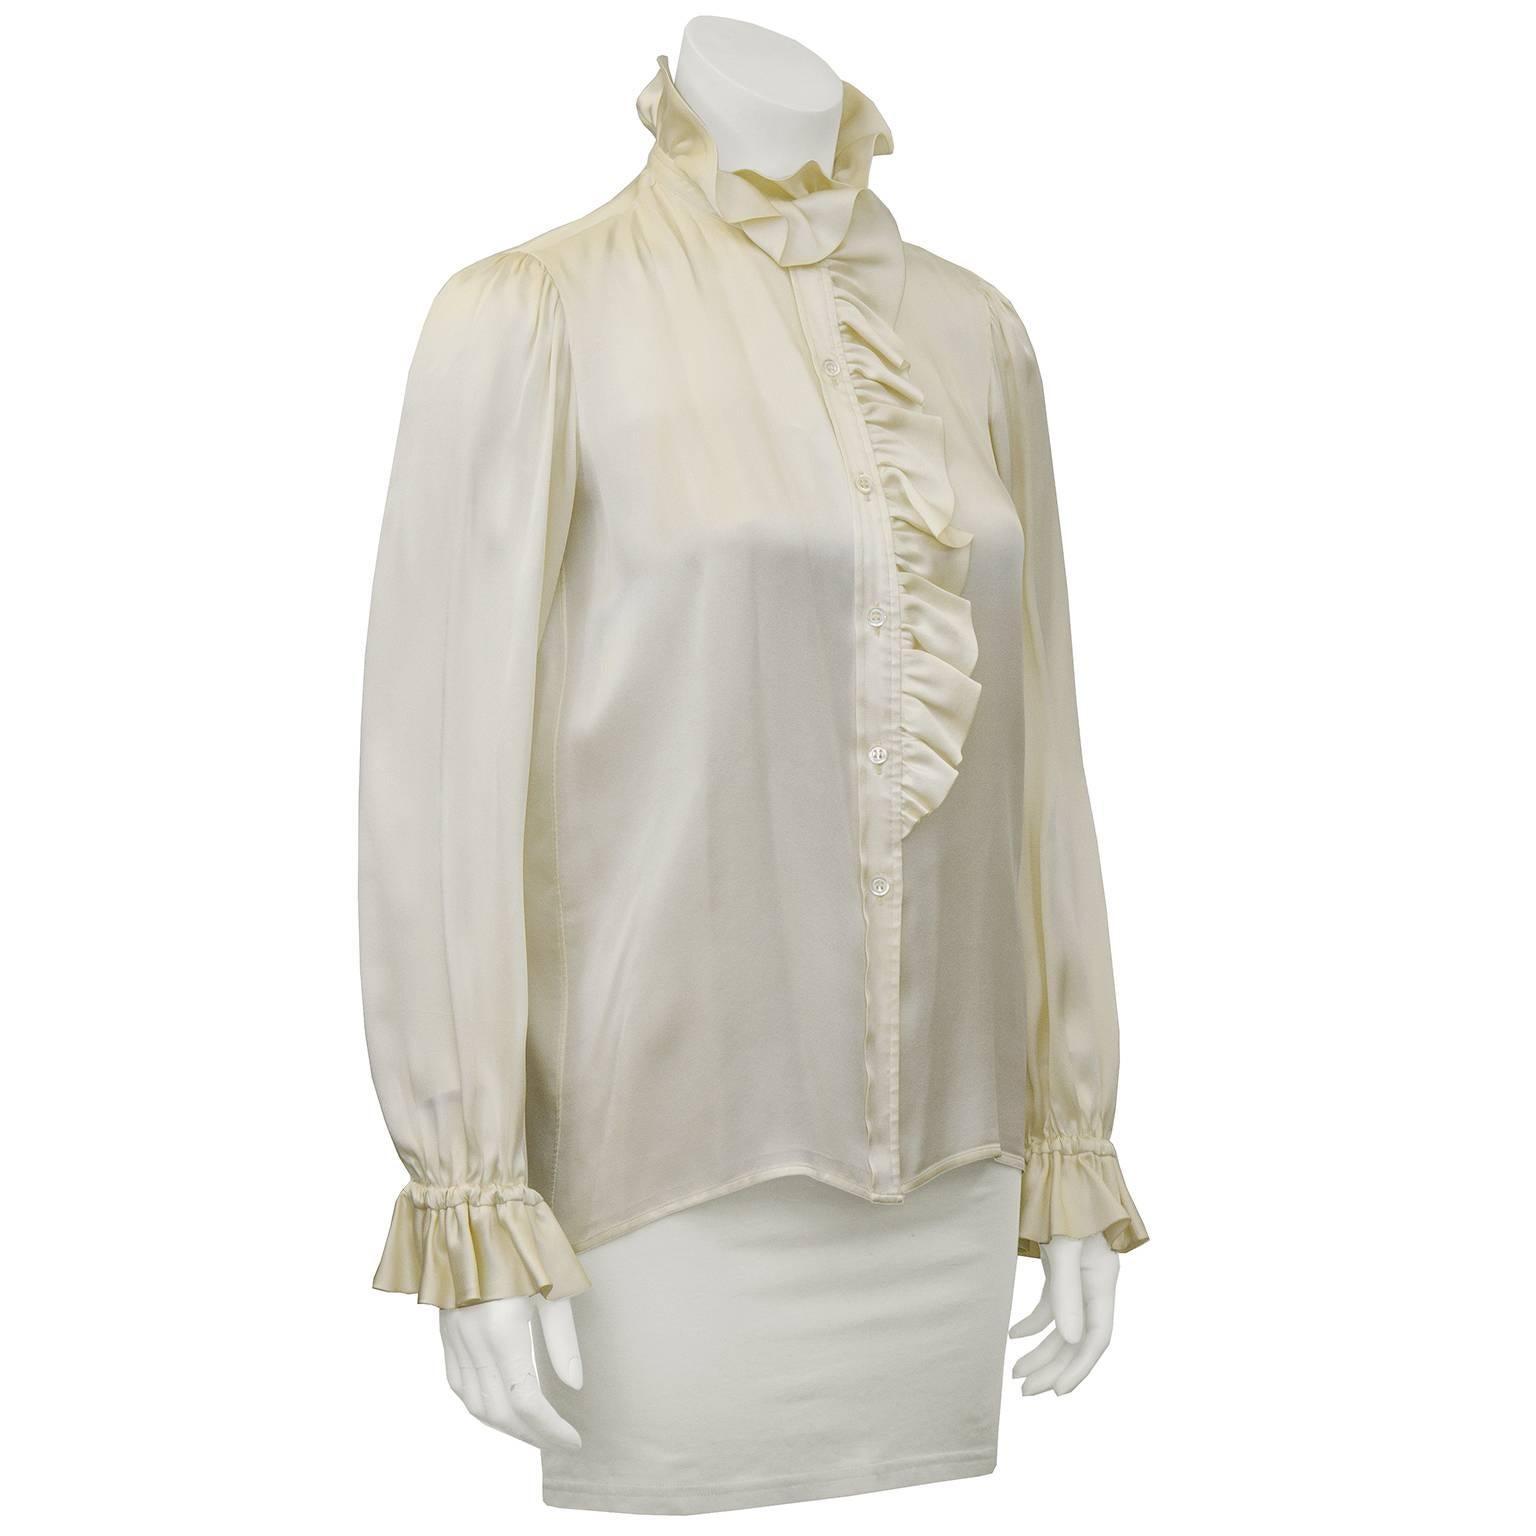 1970's Yves Saint Laurent/YSL silk satin ruffle neck and cuff front button blouse. Feminine and frilly, perfect touch to add to a classic jacket or over pants. In excellent condition, fits like a US 2.

Sleeve 16